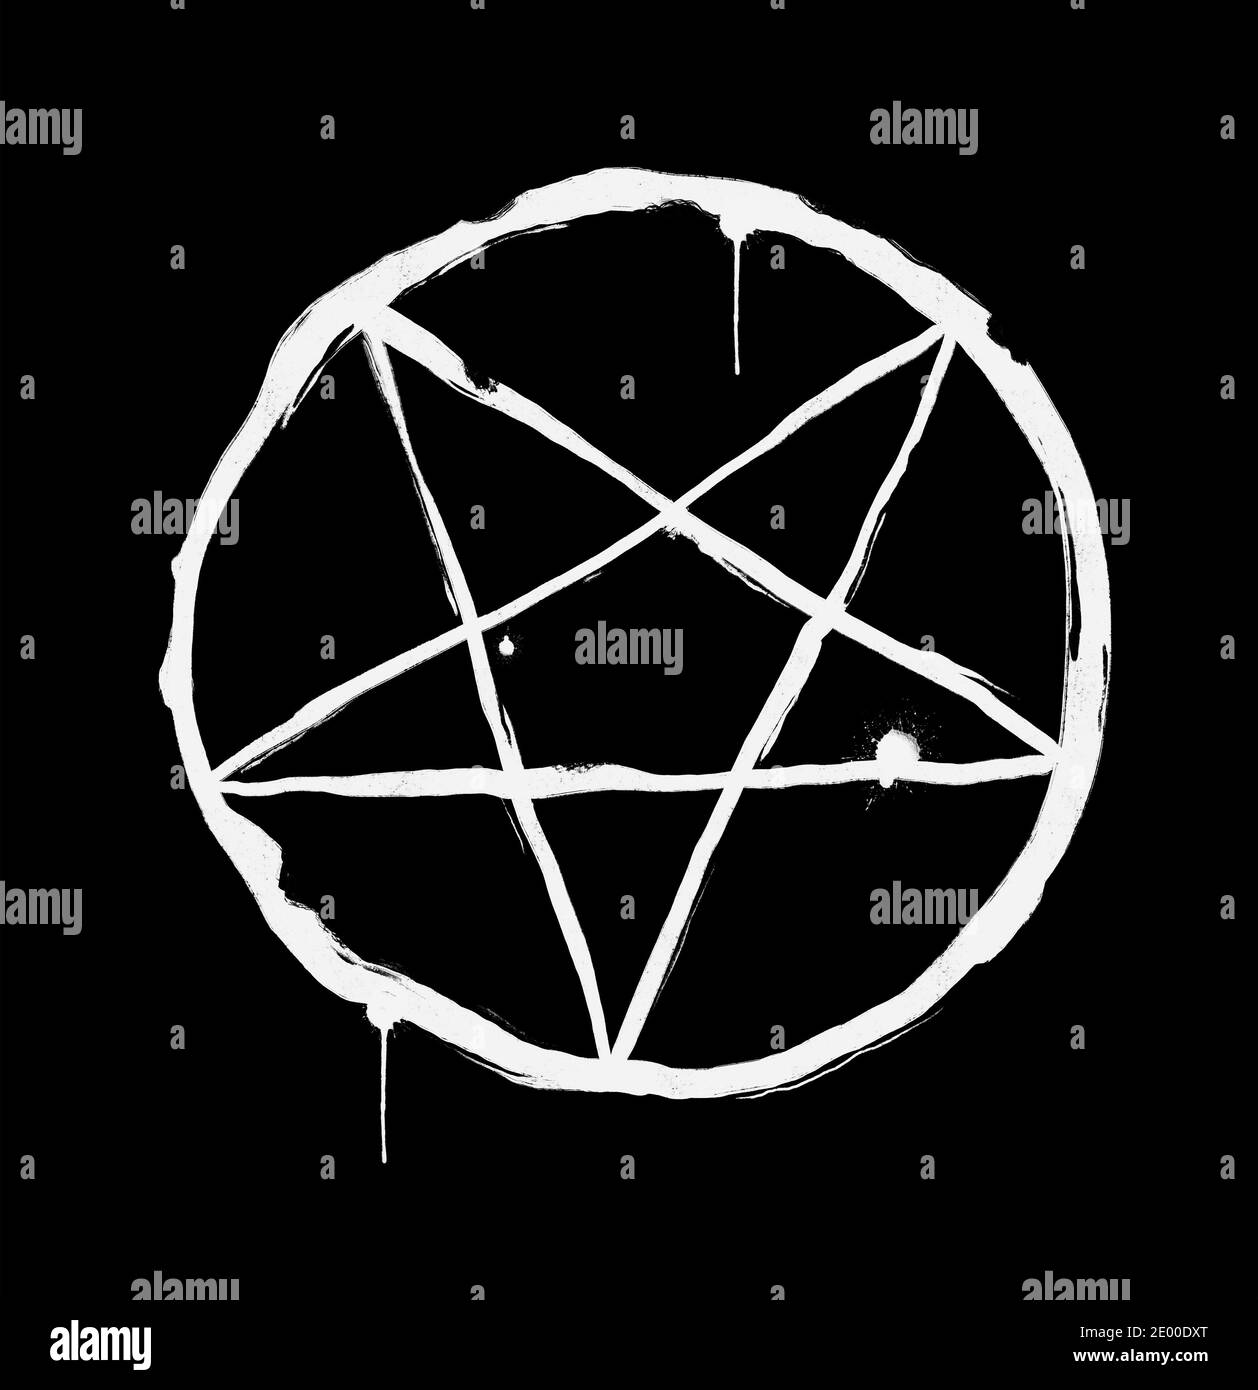 Inverted pentagram in the circle as symbol of satanism and satanist sect. Rugged, gritty and rough hand-drawn illustration on dark black plain backgro Stock Photo